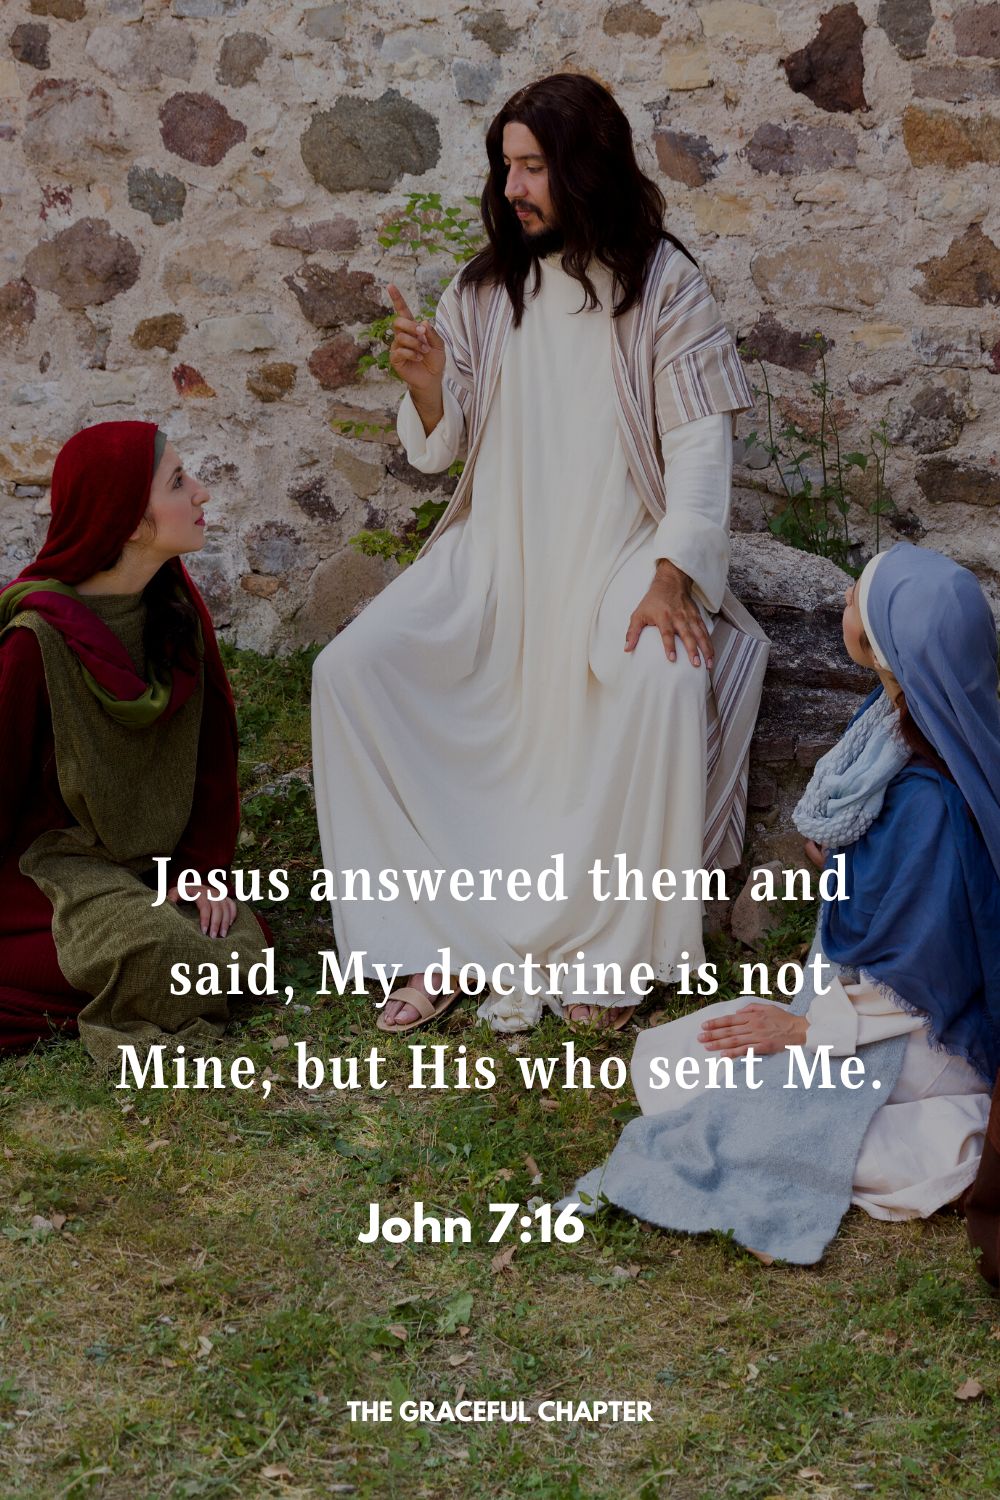 Jesus answered them and said, My doctrine is not Mine, but His who sent Me. John 7:16